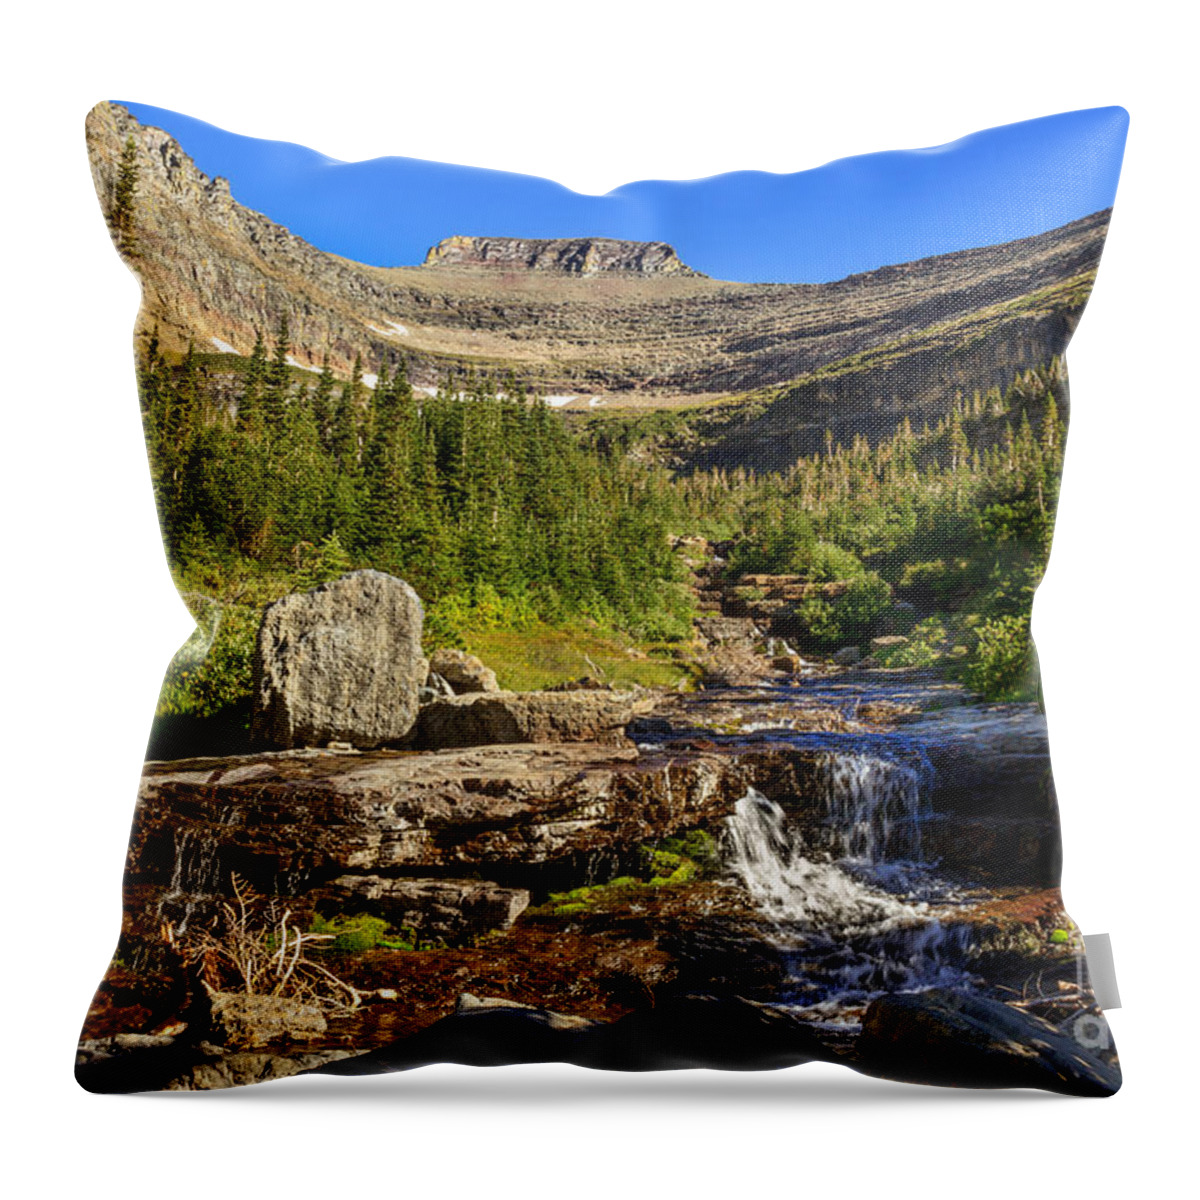 Lunch Creek Throw Pillow featuring the photograph Lunch Creek by Robert Bales